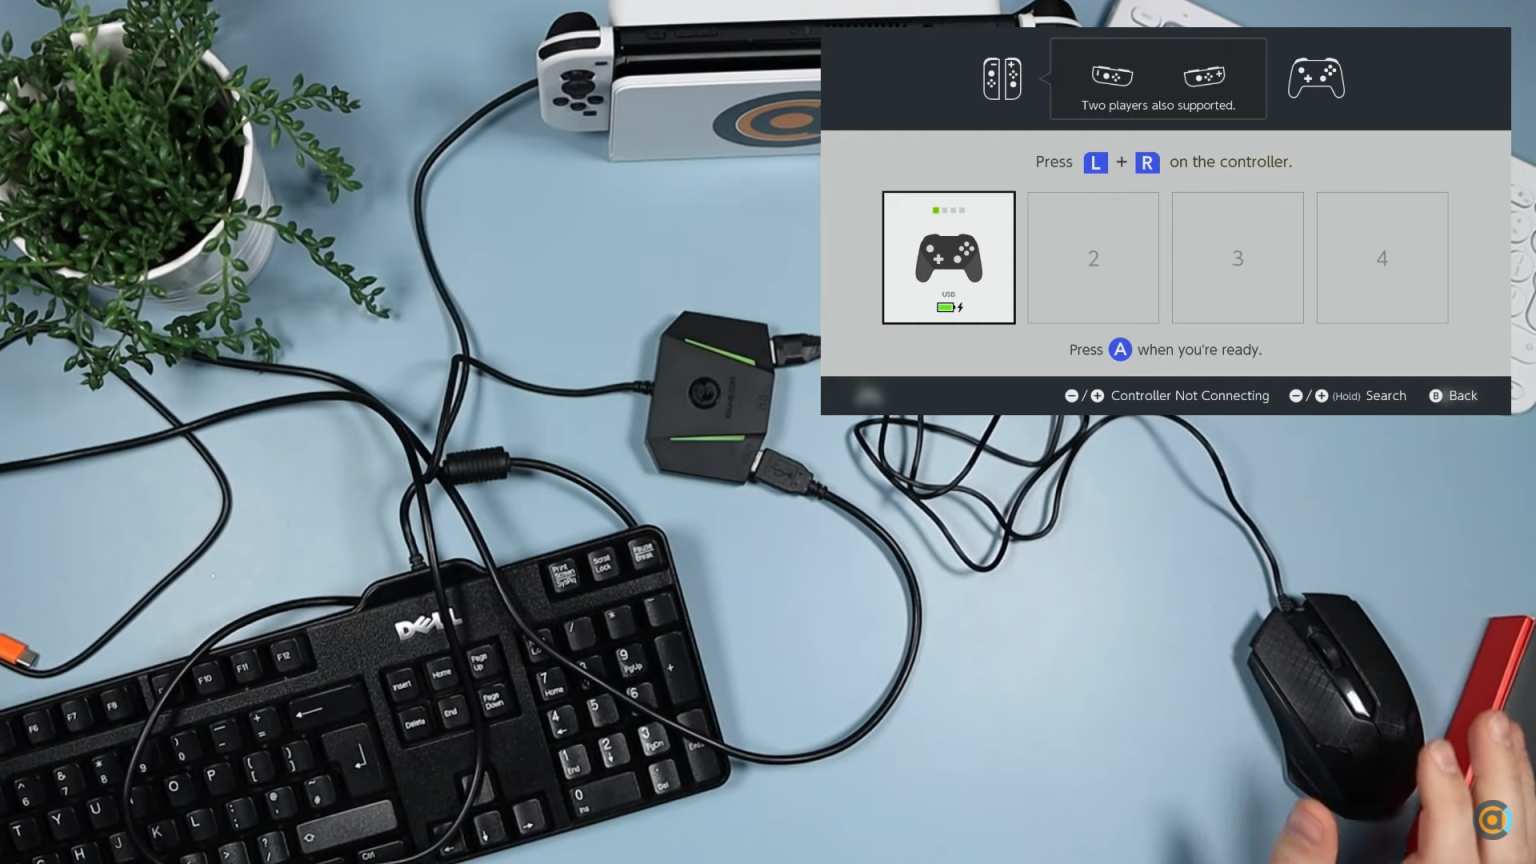 Connect adapter to dock, keyboard and mouse - (Source: CTA - tech desk)